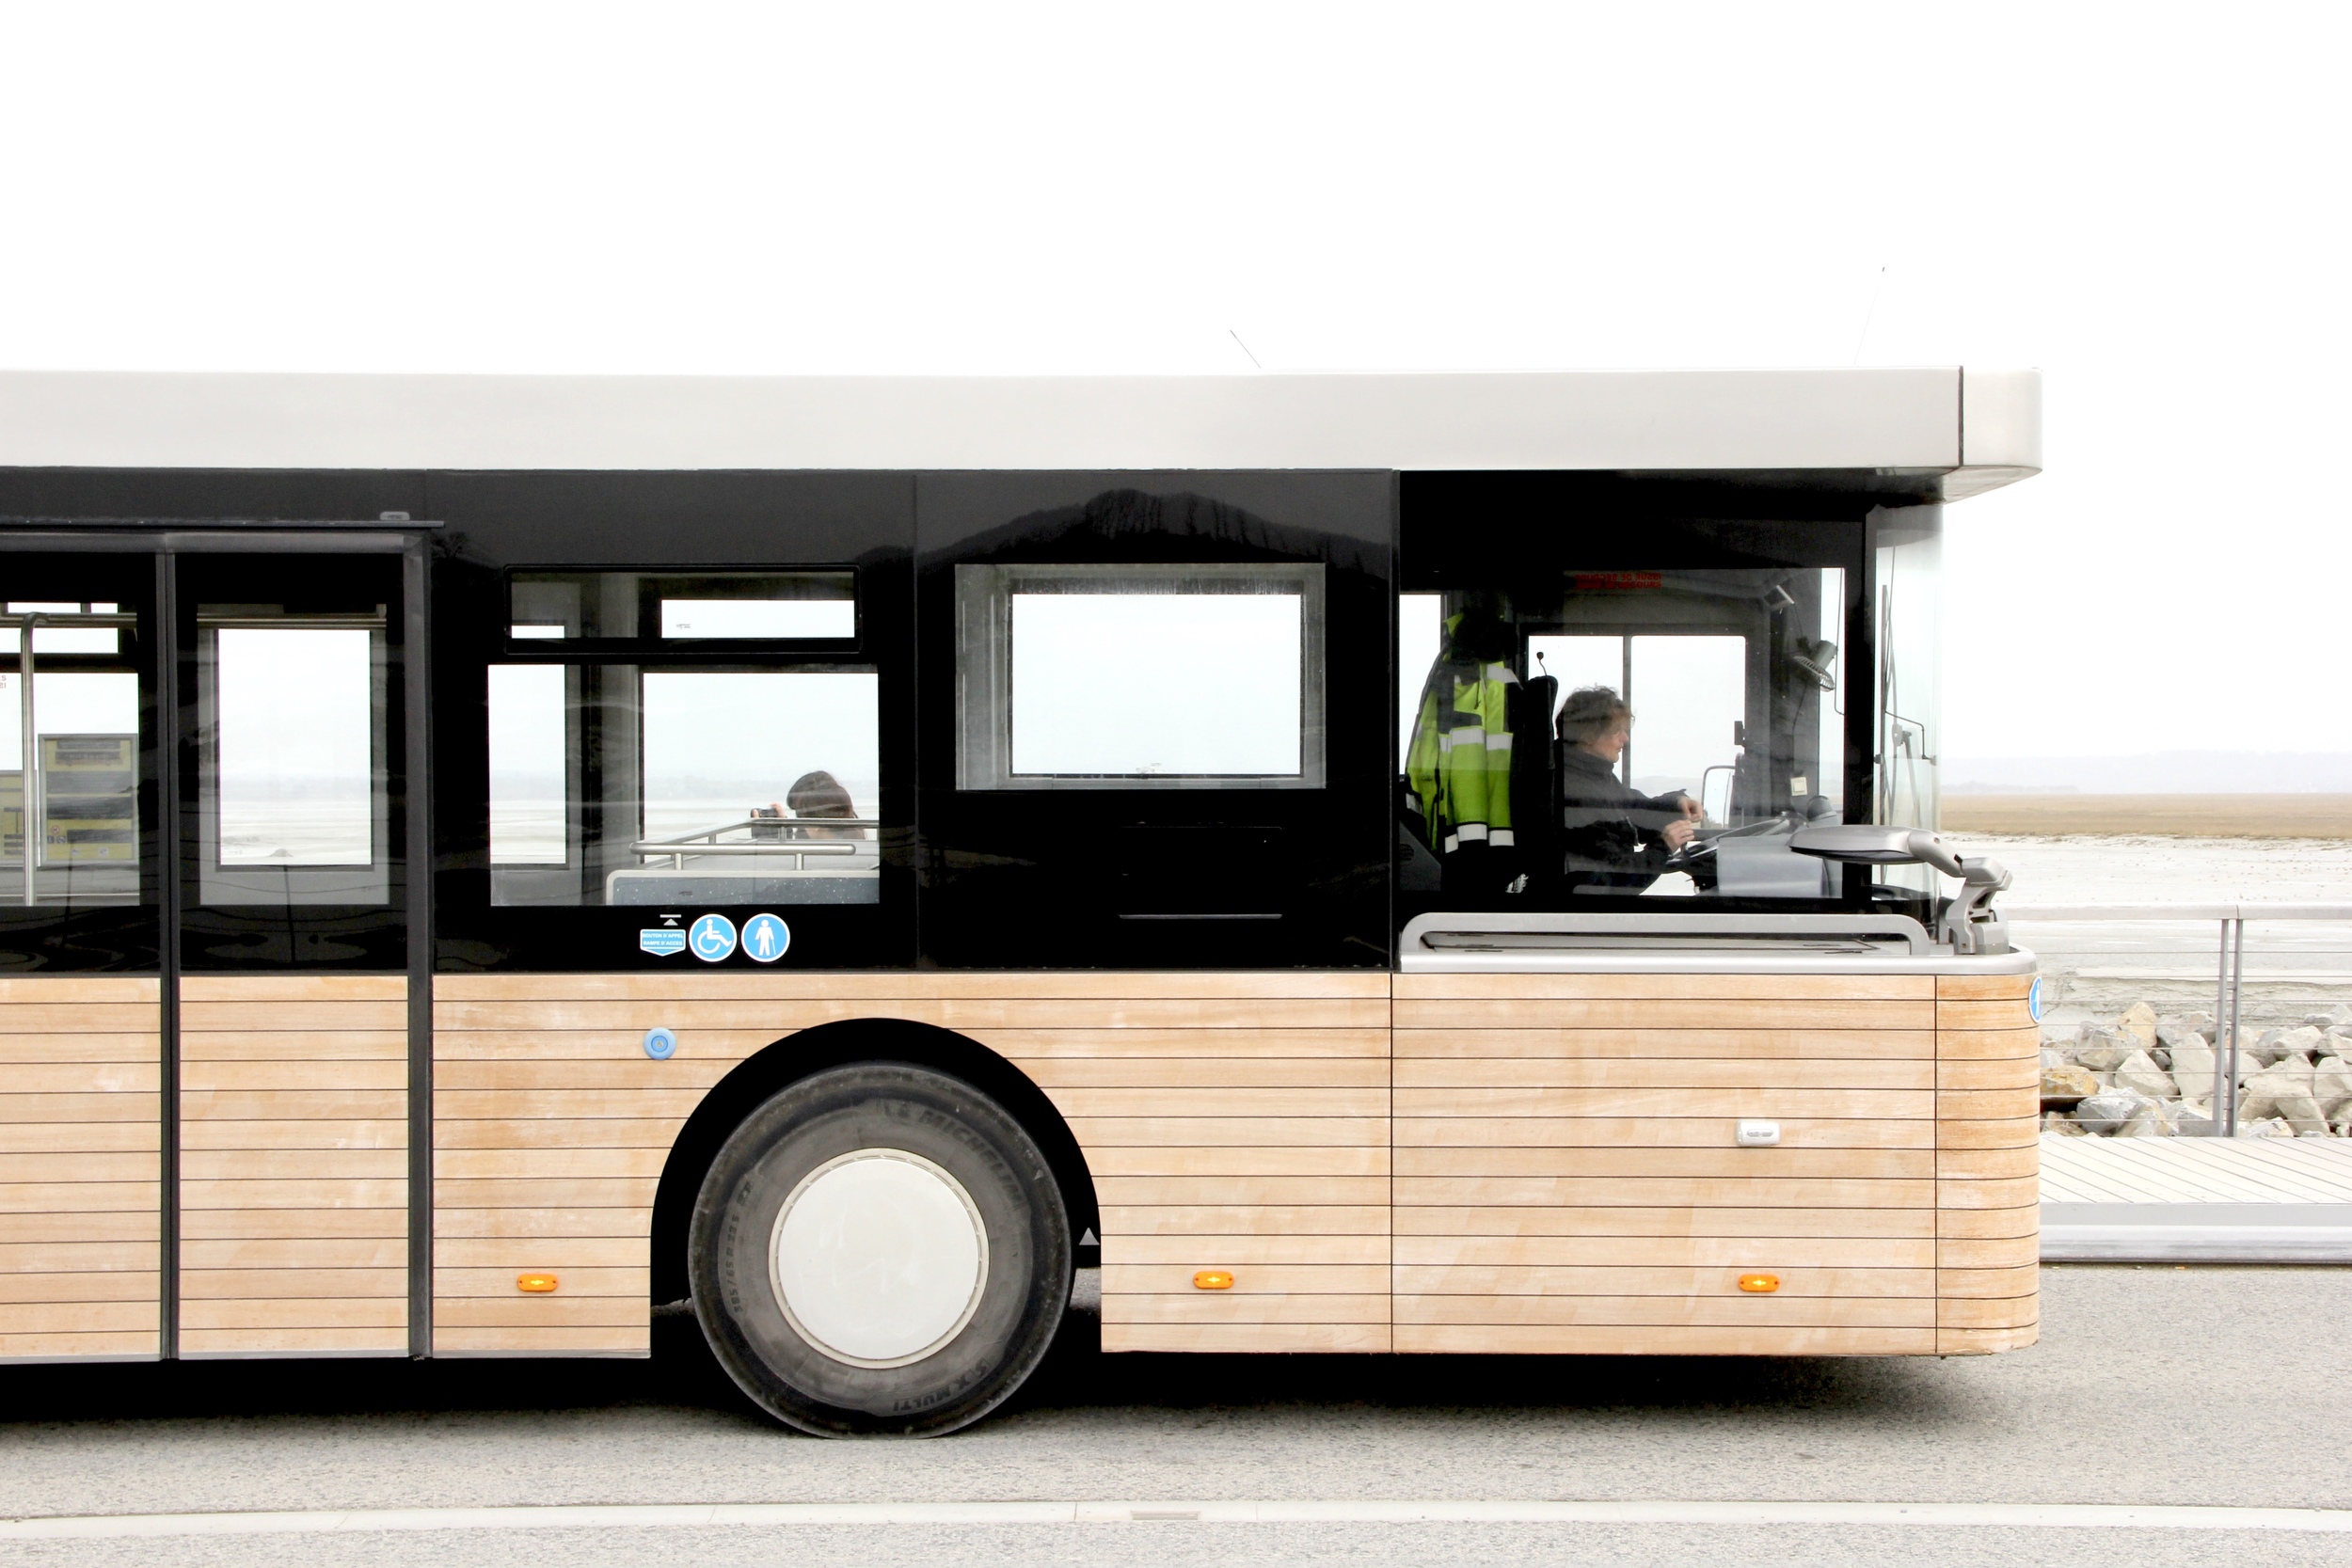 Wood paneled buses at Le Mont St Michel